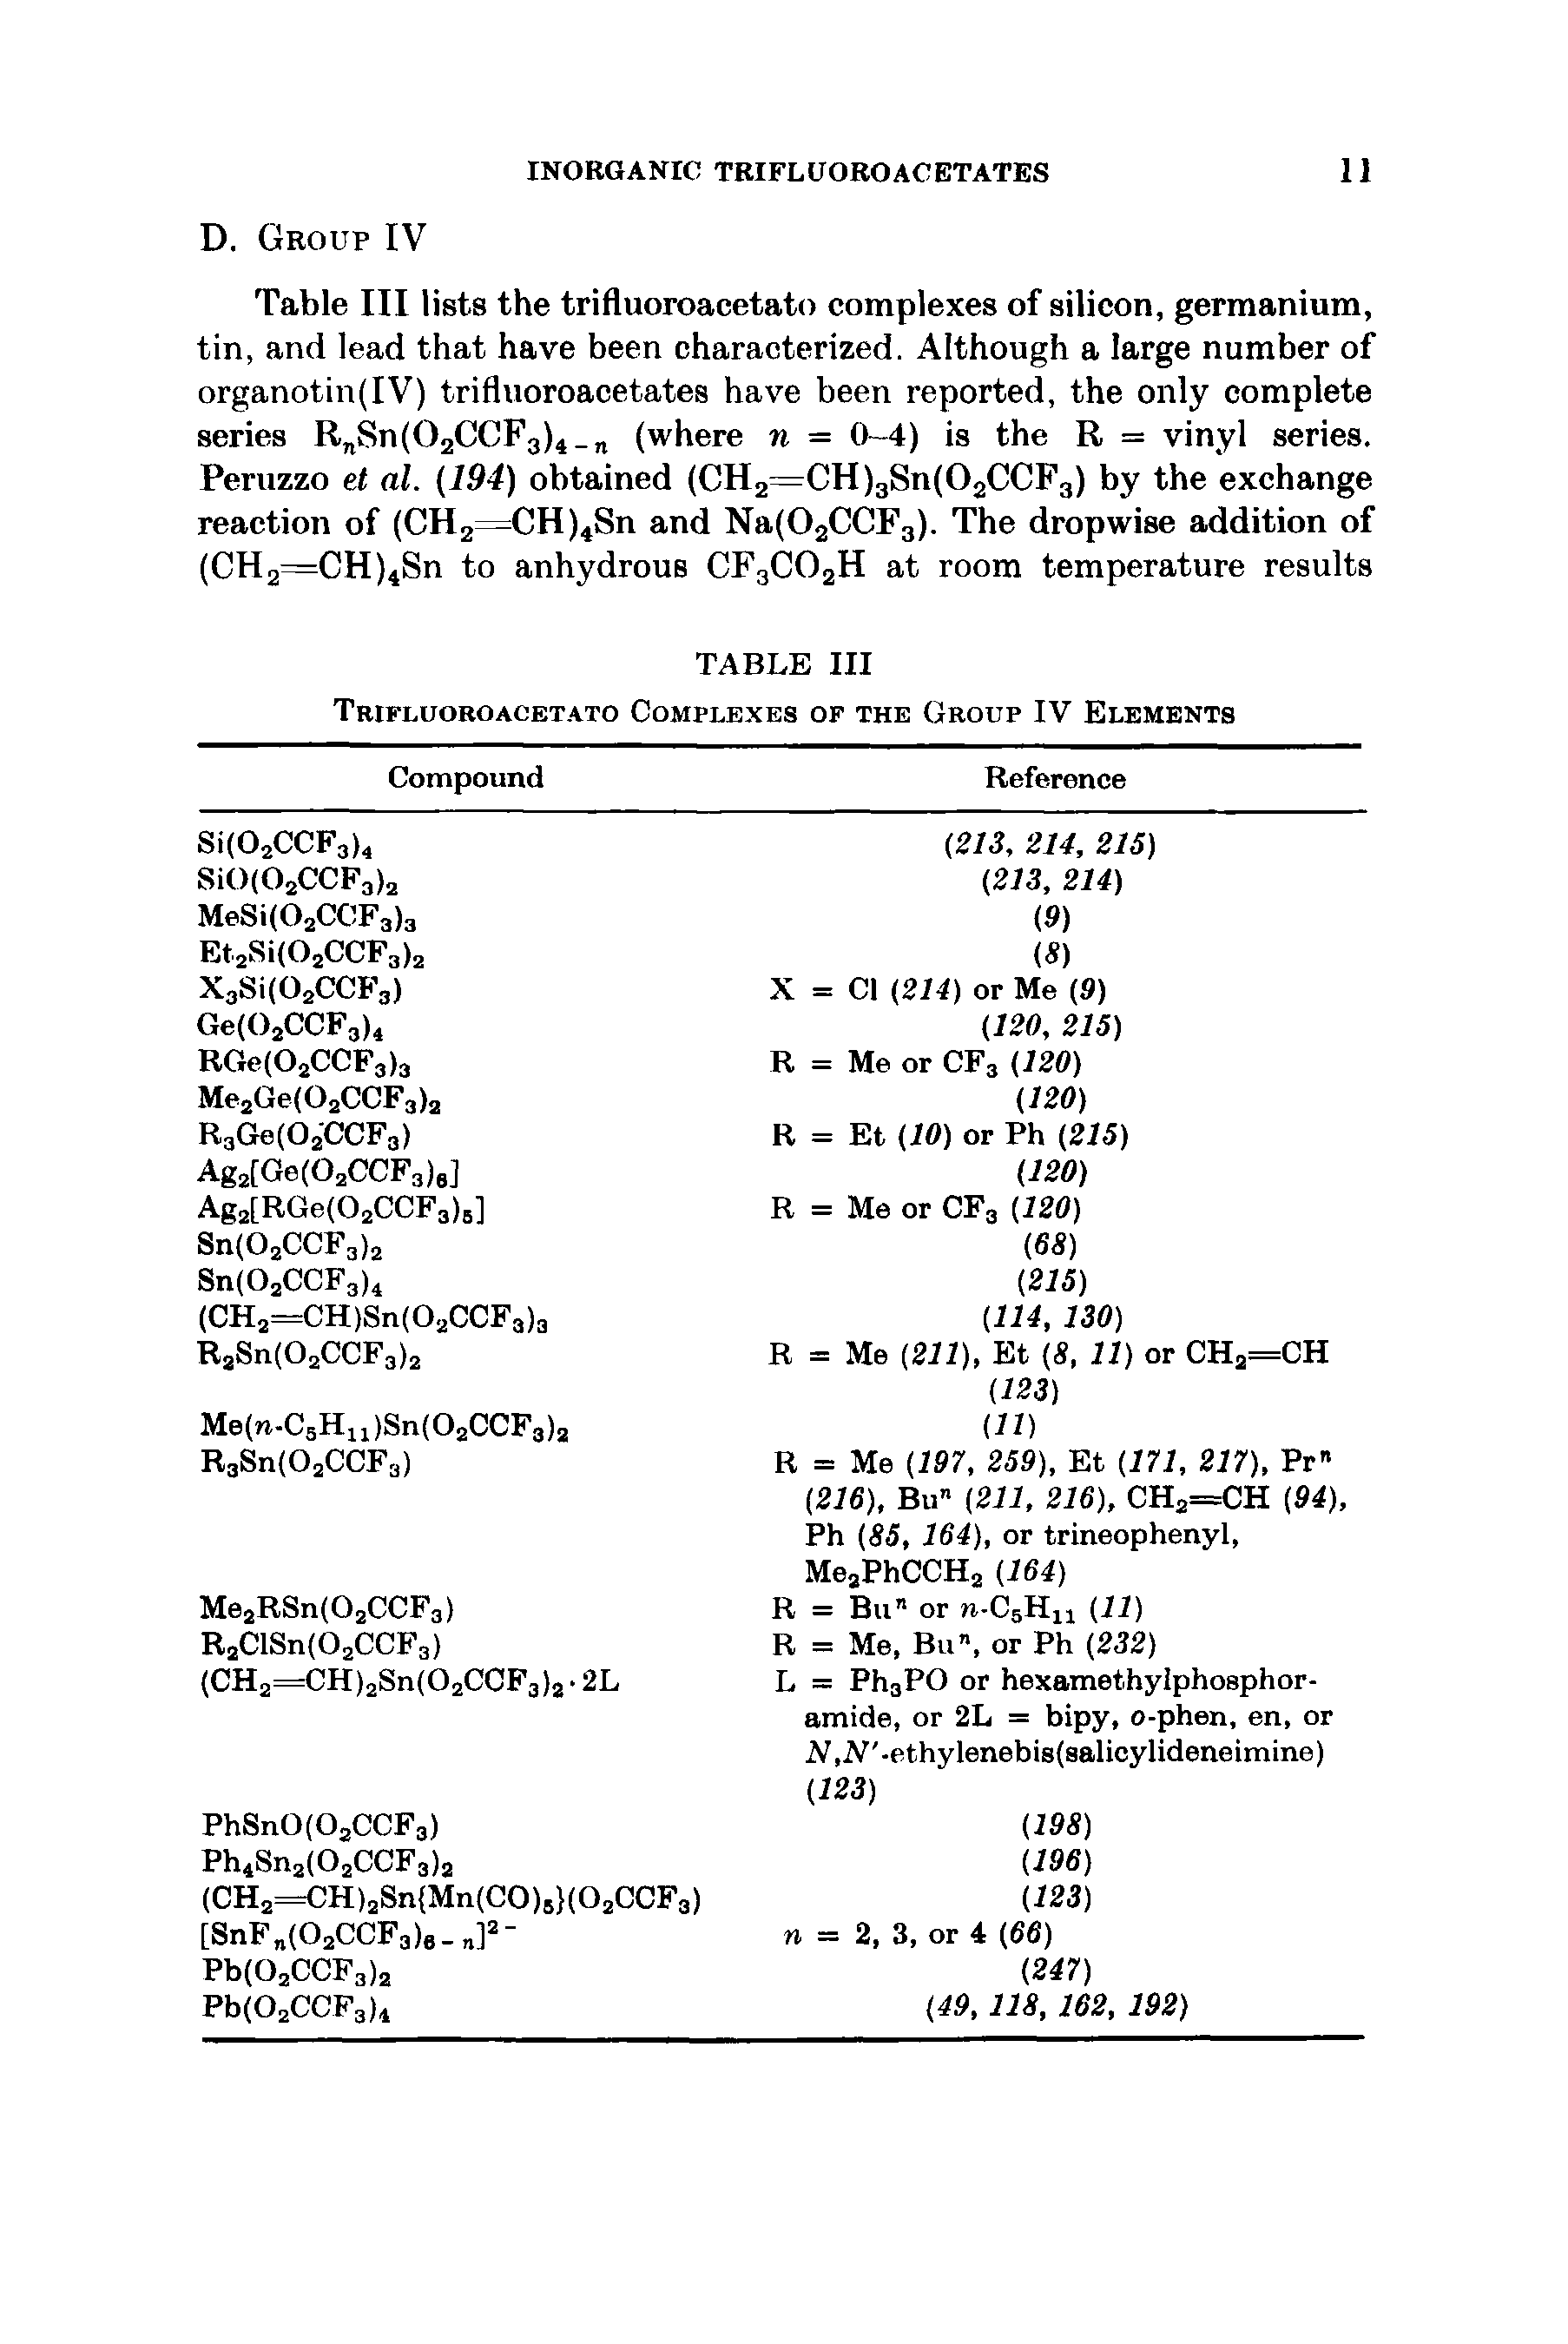 Table III lists the trifluoroacetato complexes of silicon, germanium, tin, and lead that have been characterized. Although a large number of organotin(IV) trifluoroacetates have been reported, the only complete series R Sn(02CCF3)4 (where n = 0-4) is the R = vinyl series. Peruzzo et al. (194) obtained (CH2=CH)3Sn(02CCF3) by the exchange reaction of (CH2=CH)4Sn and Na(02CCF3). The dropwise addition of (CH2=CH)4Sn to anhydrous CFgCOgH at room temperature results...